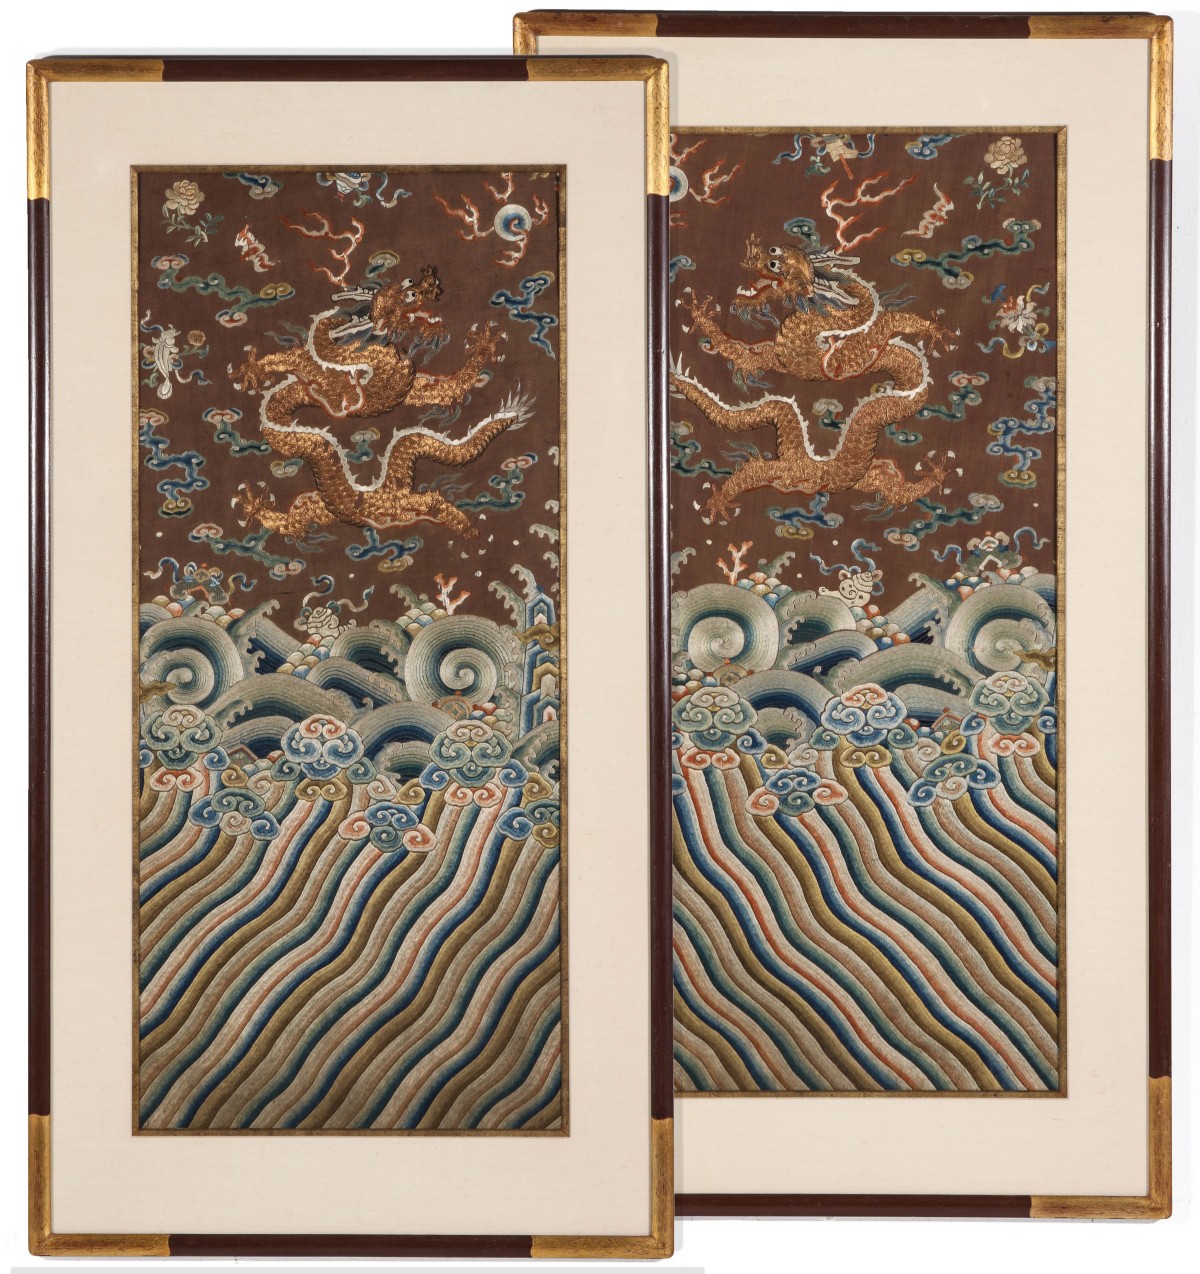 A PAIR OF ELABORATELY EMBROIDERED CHINESE SILK PANELS